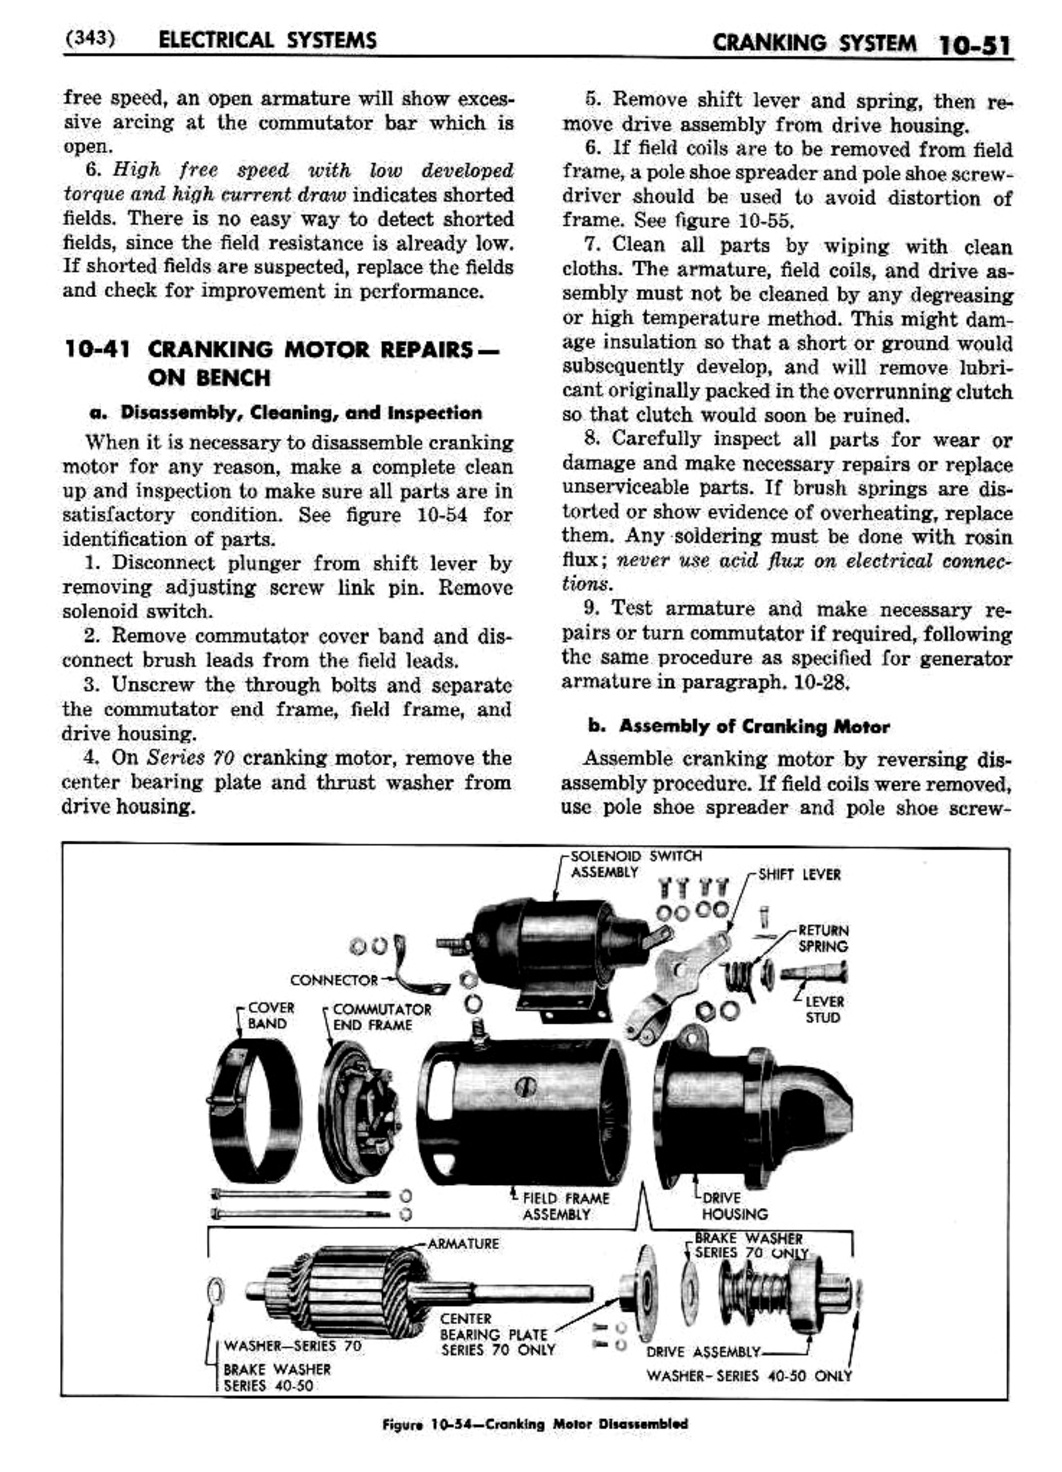 n_11 1951 Buick Shop Manual - Electrical Systems-051-051.jpg